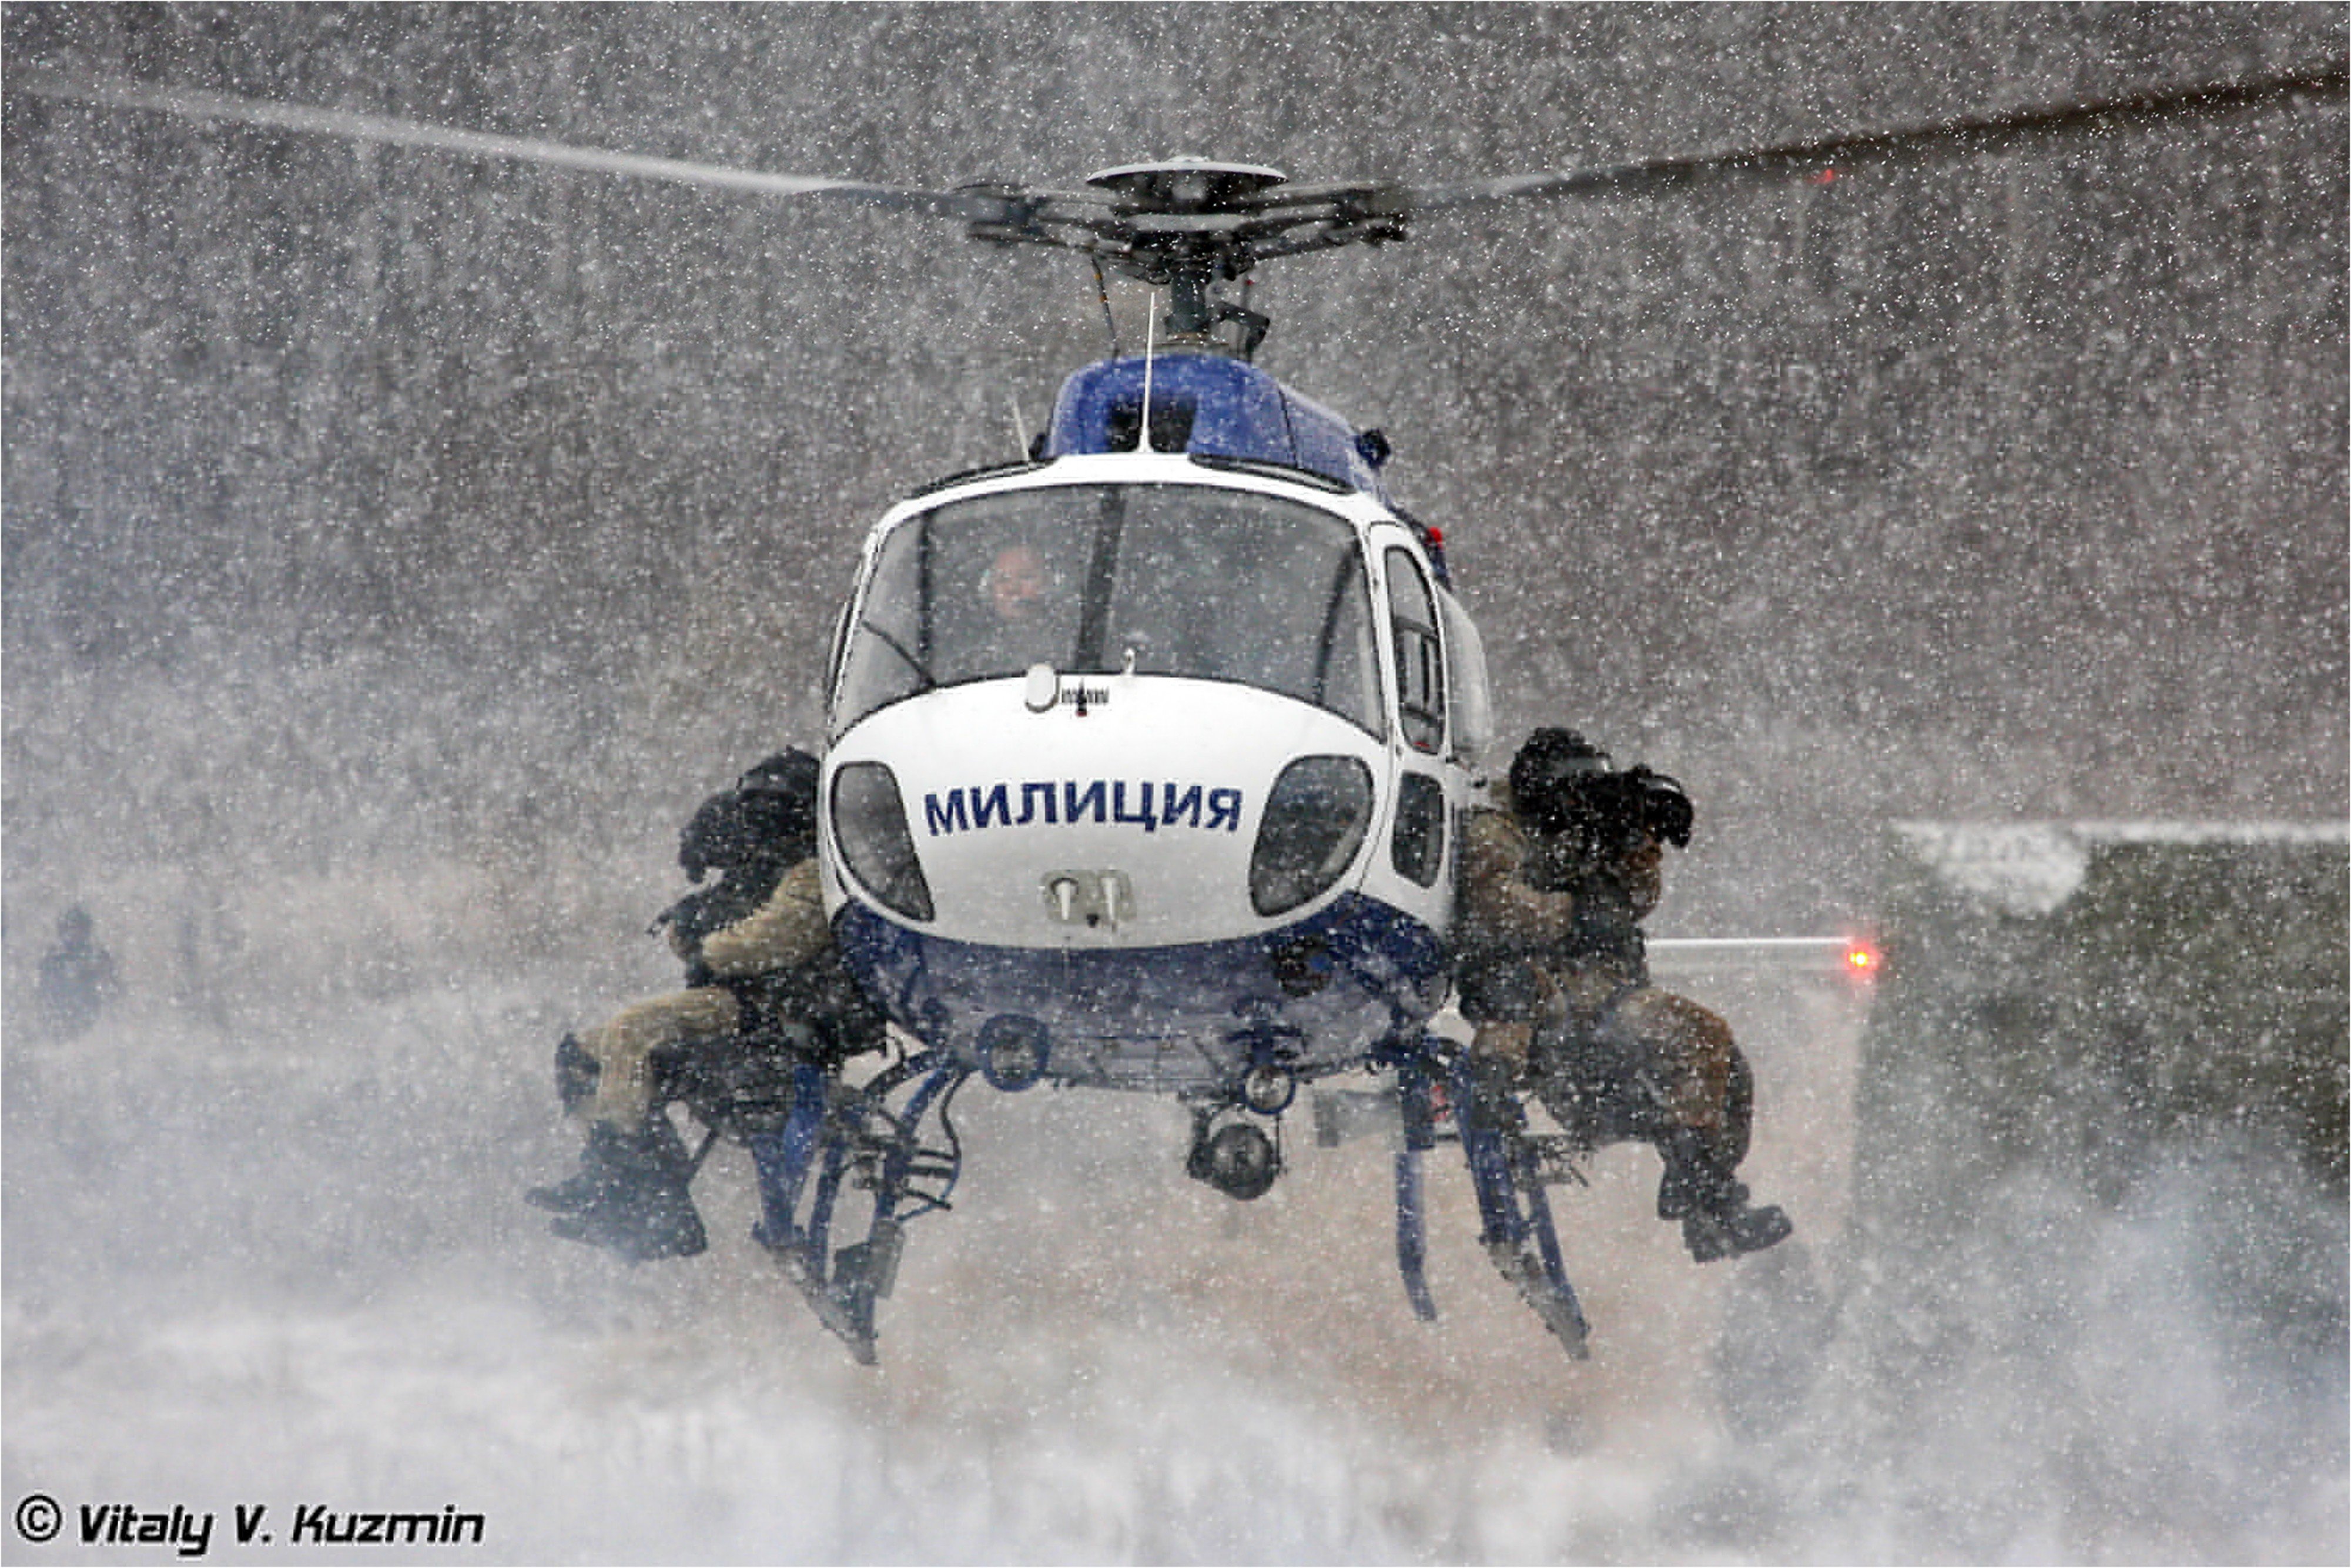 russian, Red, Star, Russia, Helicopter, Aircraft, Vehicle, Military, Police, Special, Force, Troops, Snow, 4000x2668 Wallpaper